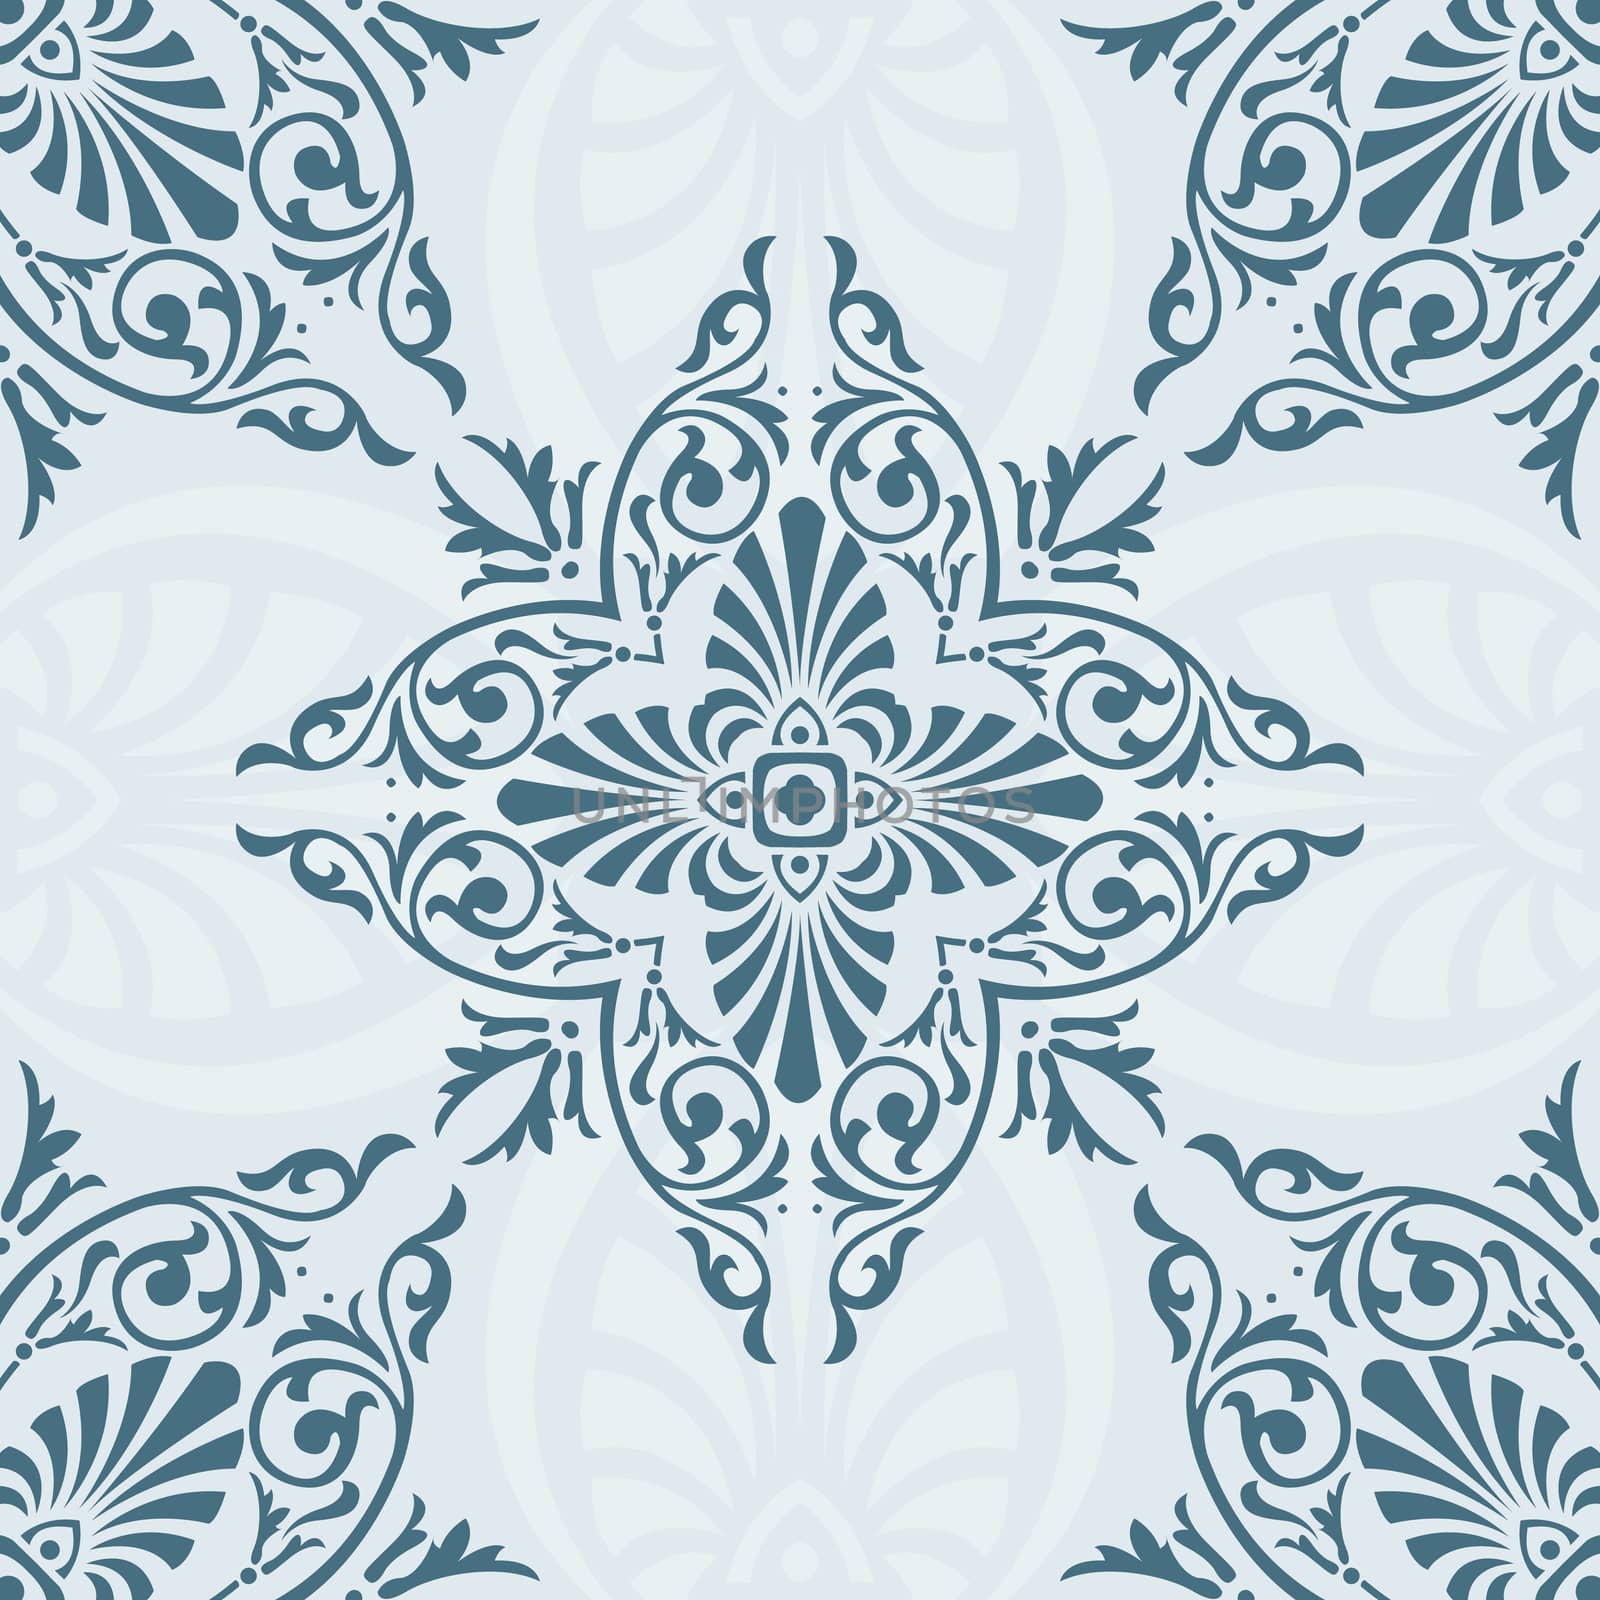 Pattern vector by WaD